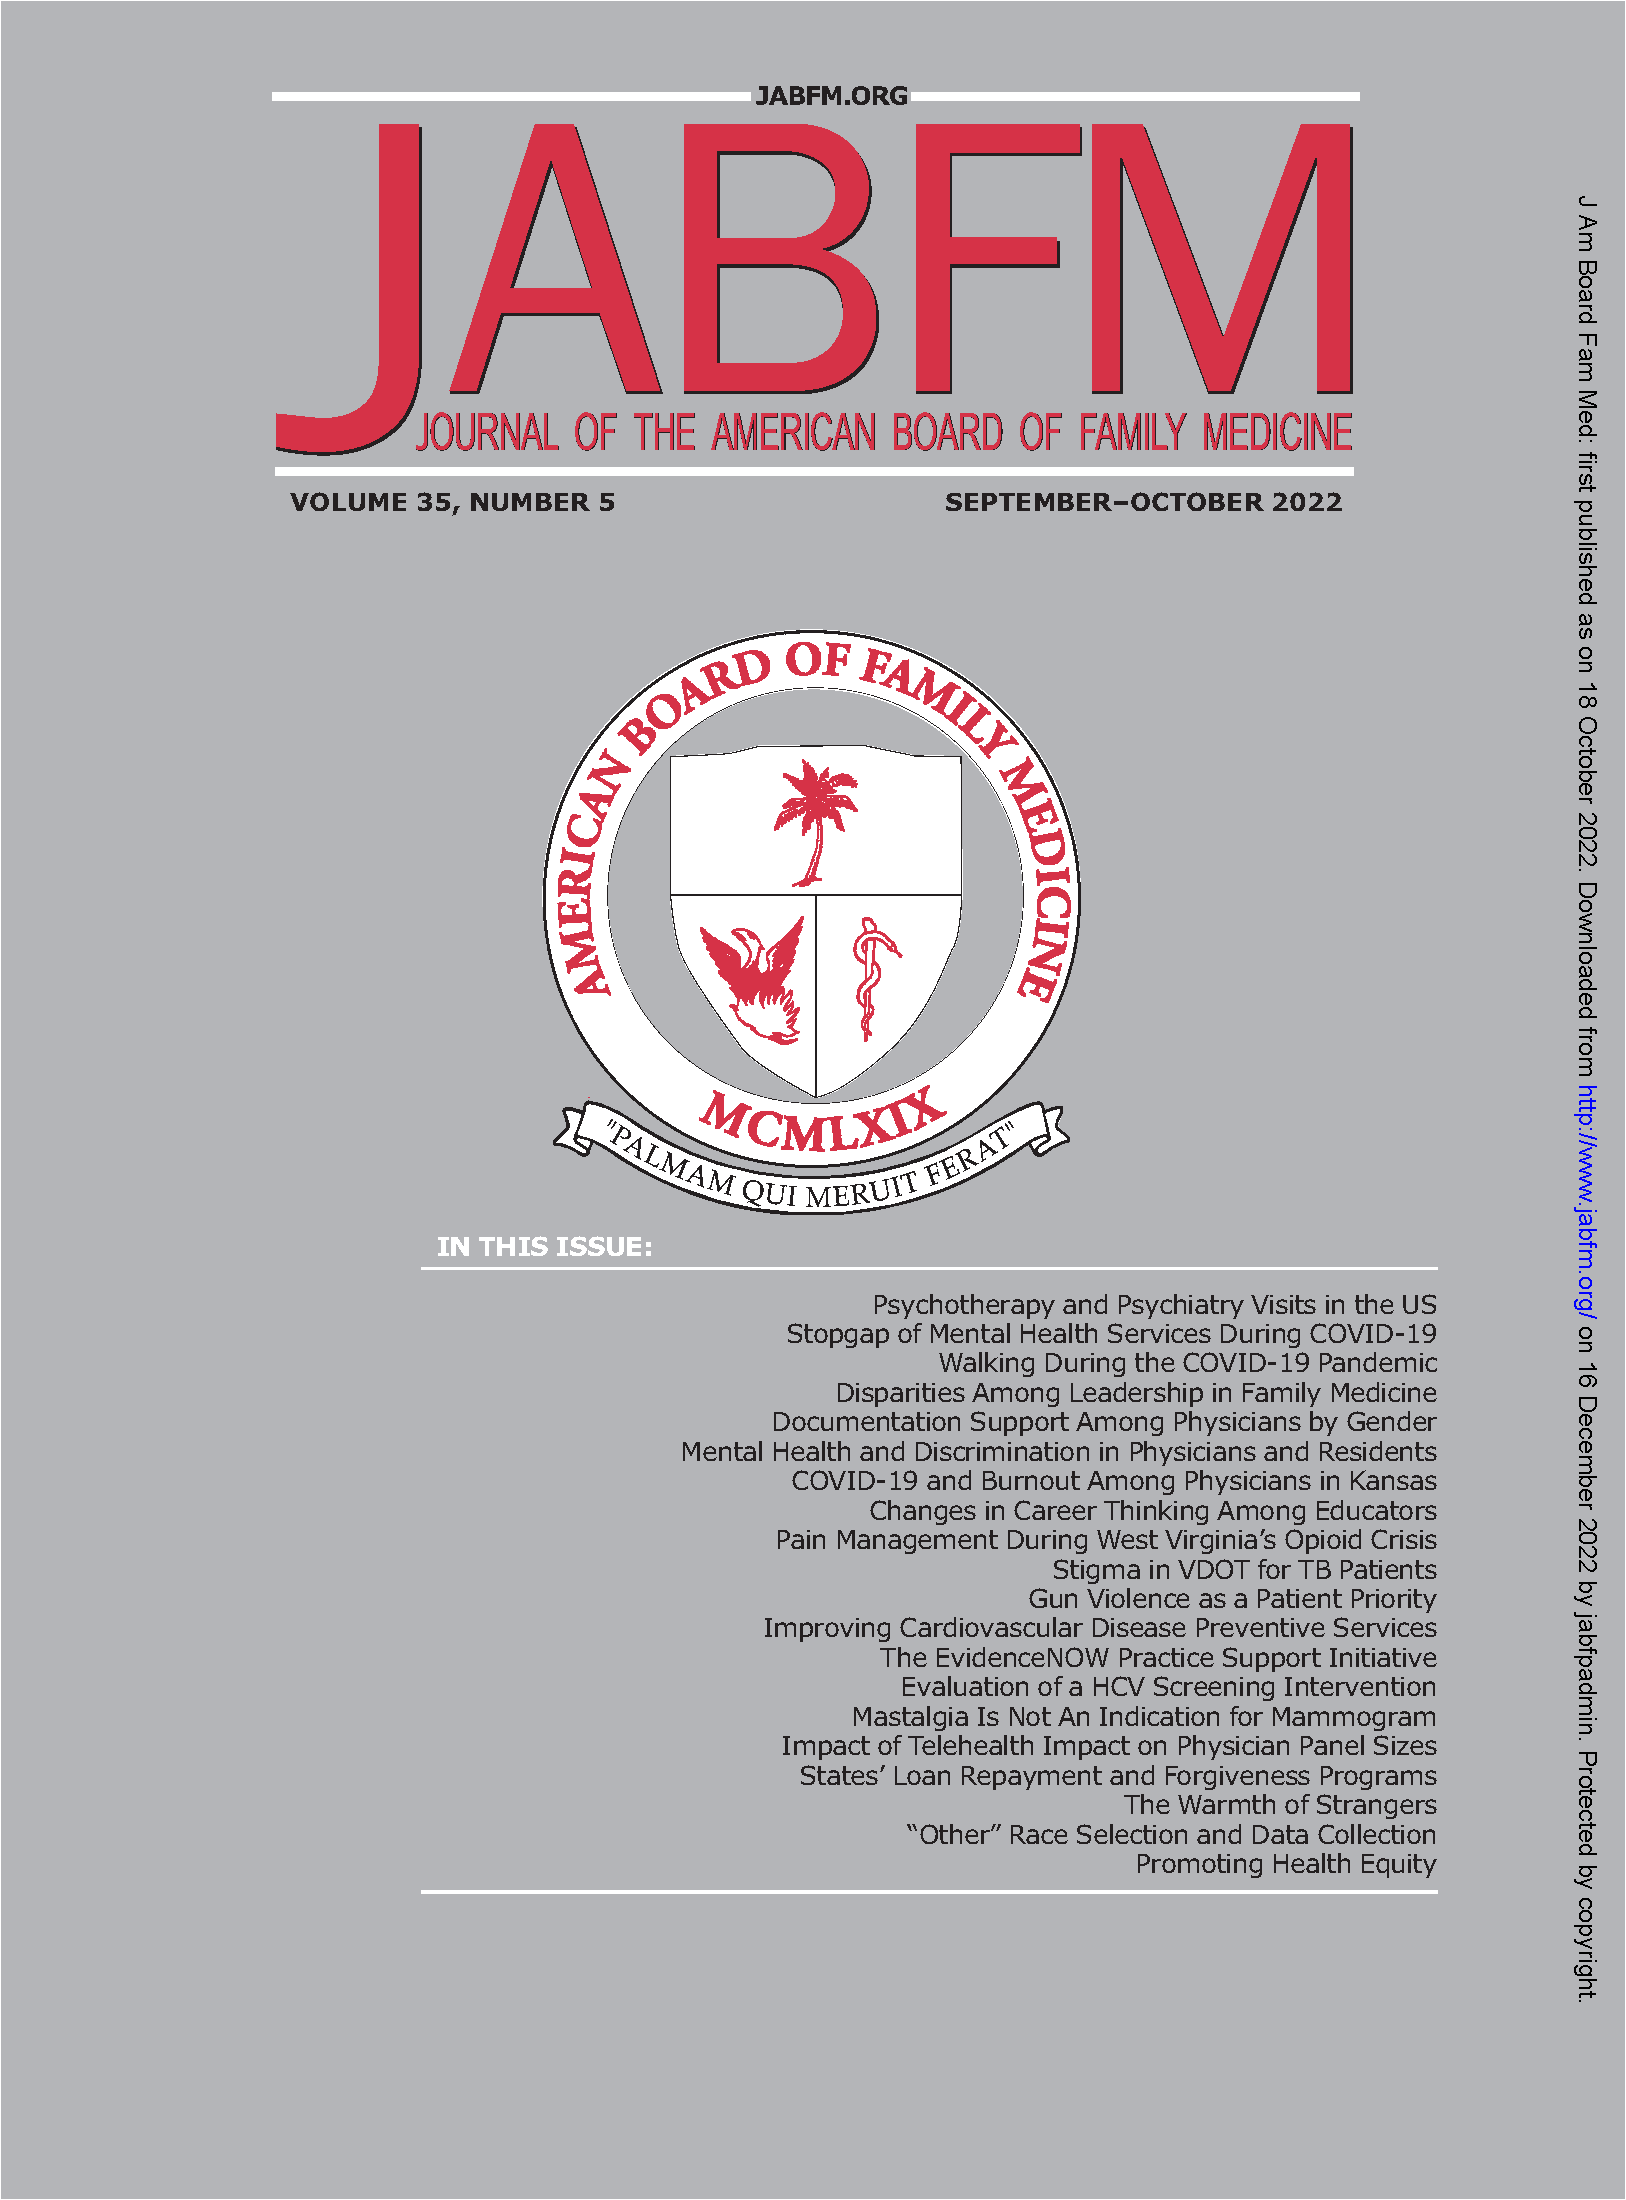 JABFM_COVER.png